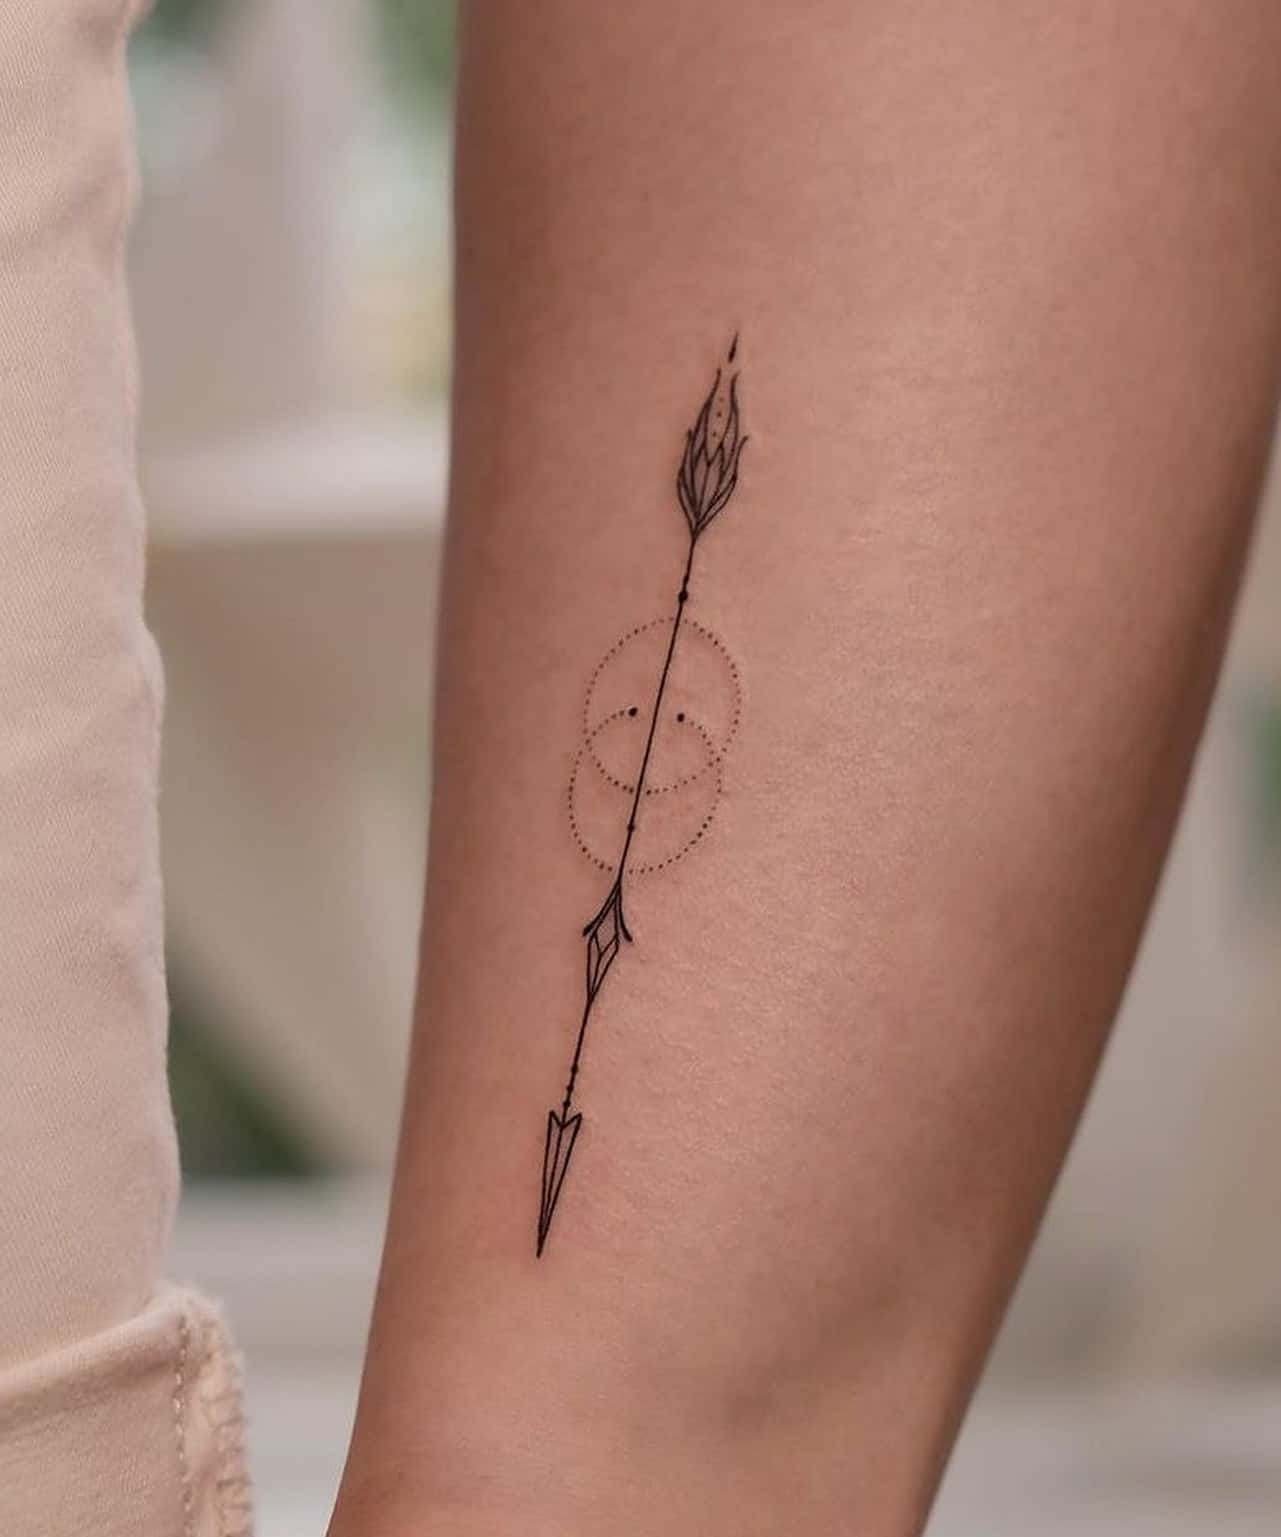 What does an arrow tattoo mean